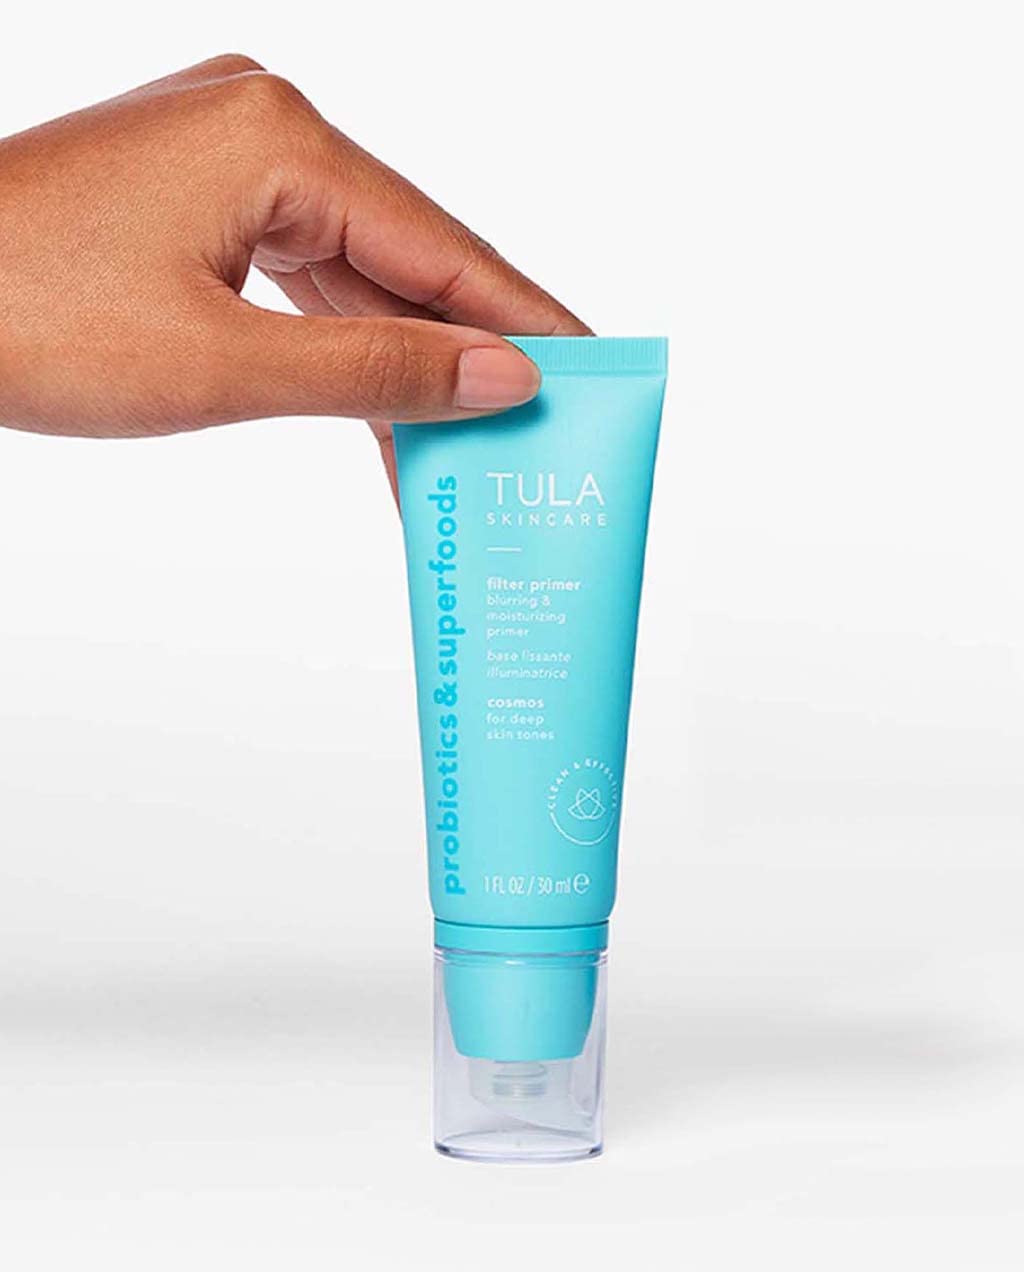 TULA Skin Care Face Filter Blurring and Moisturizing Primer - Cosmos, Evens the Appearance of Skin Tone & Redness, Hydrates & Improves Makeup Wear, 1fl oz